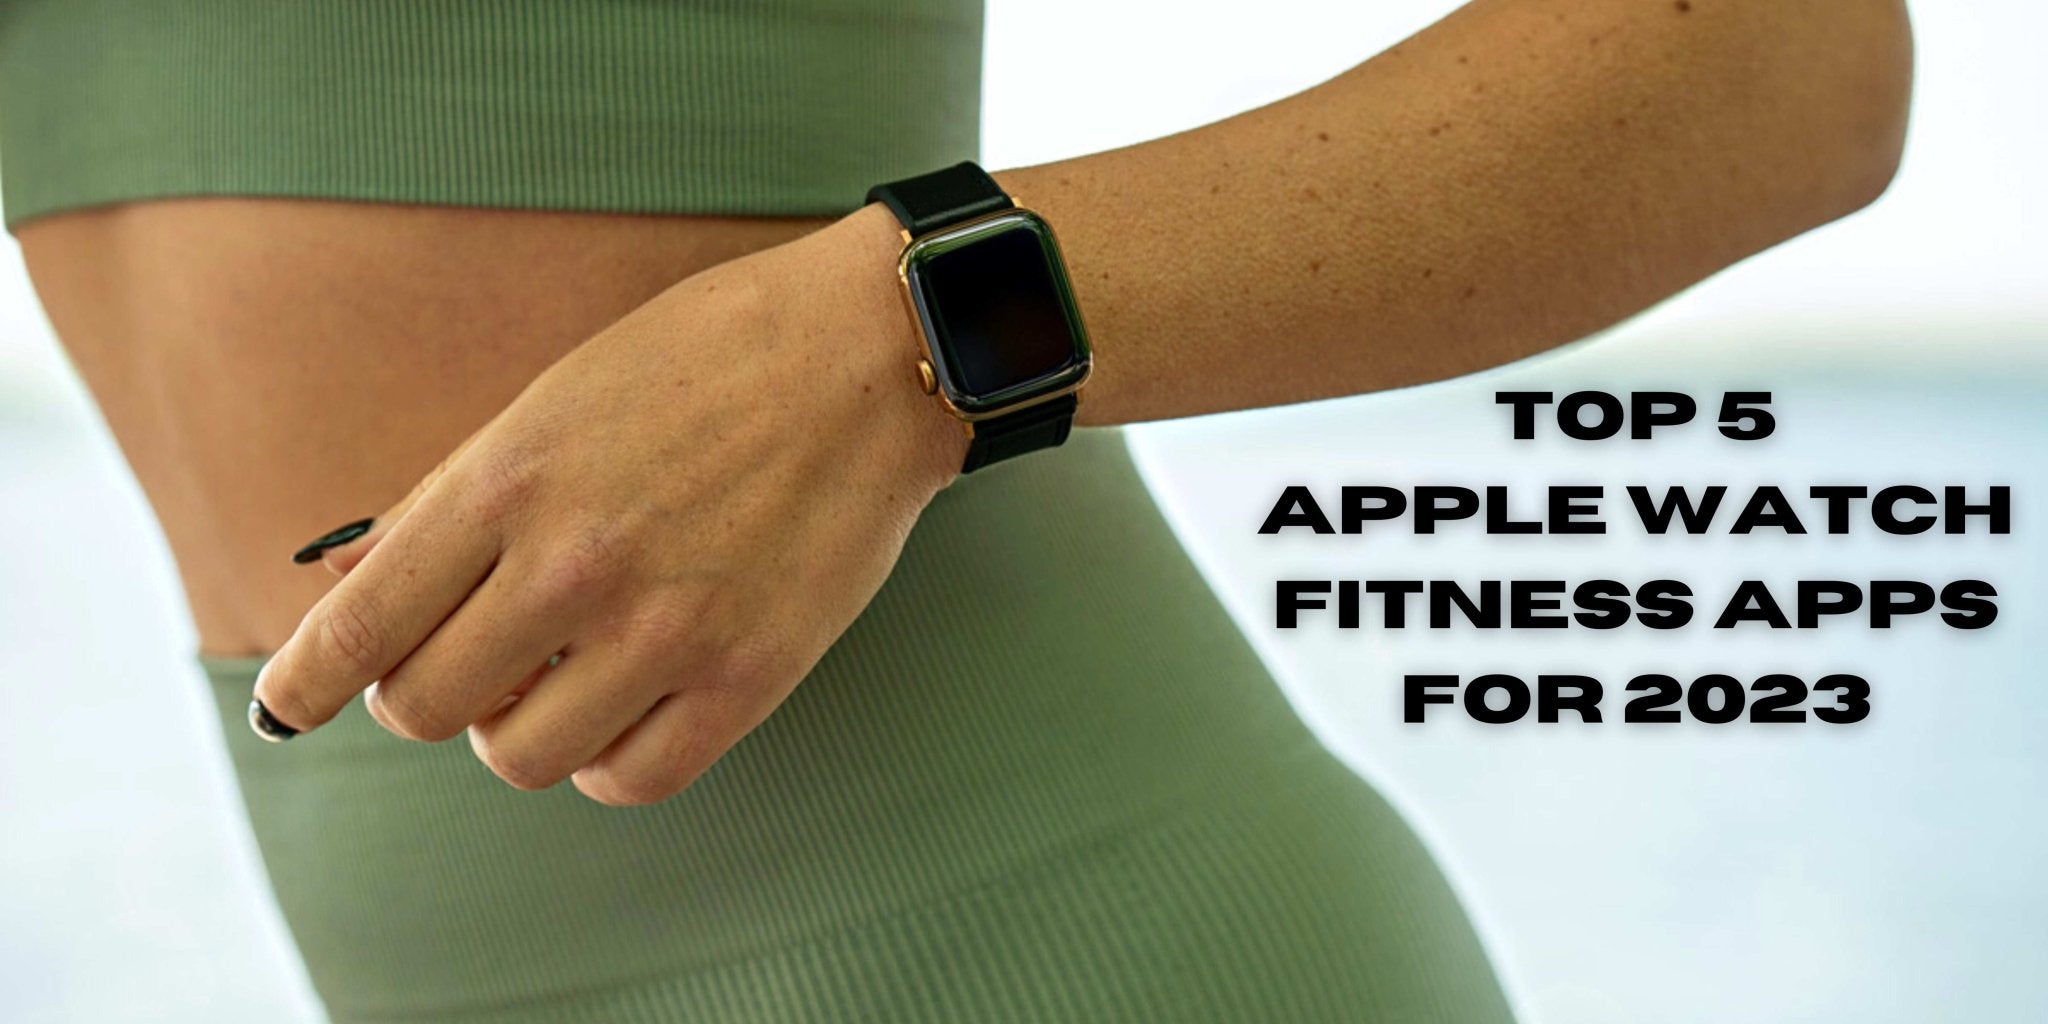 Top 5 Apple Watch Fitness Apps for 2023! - Buckle and Band